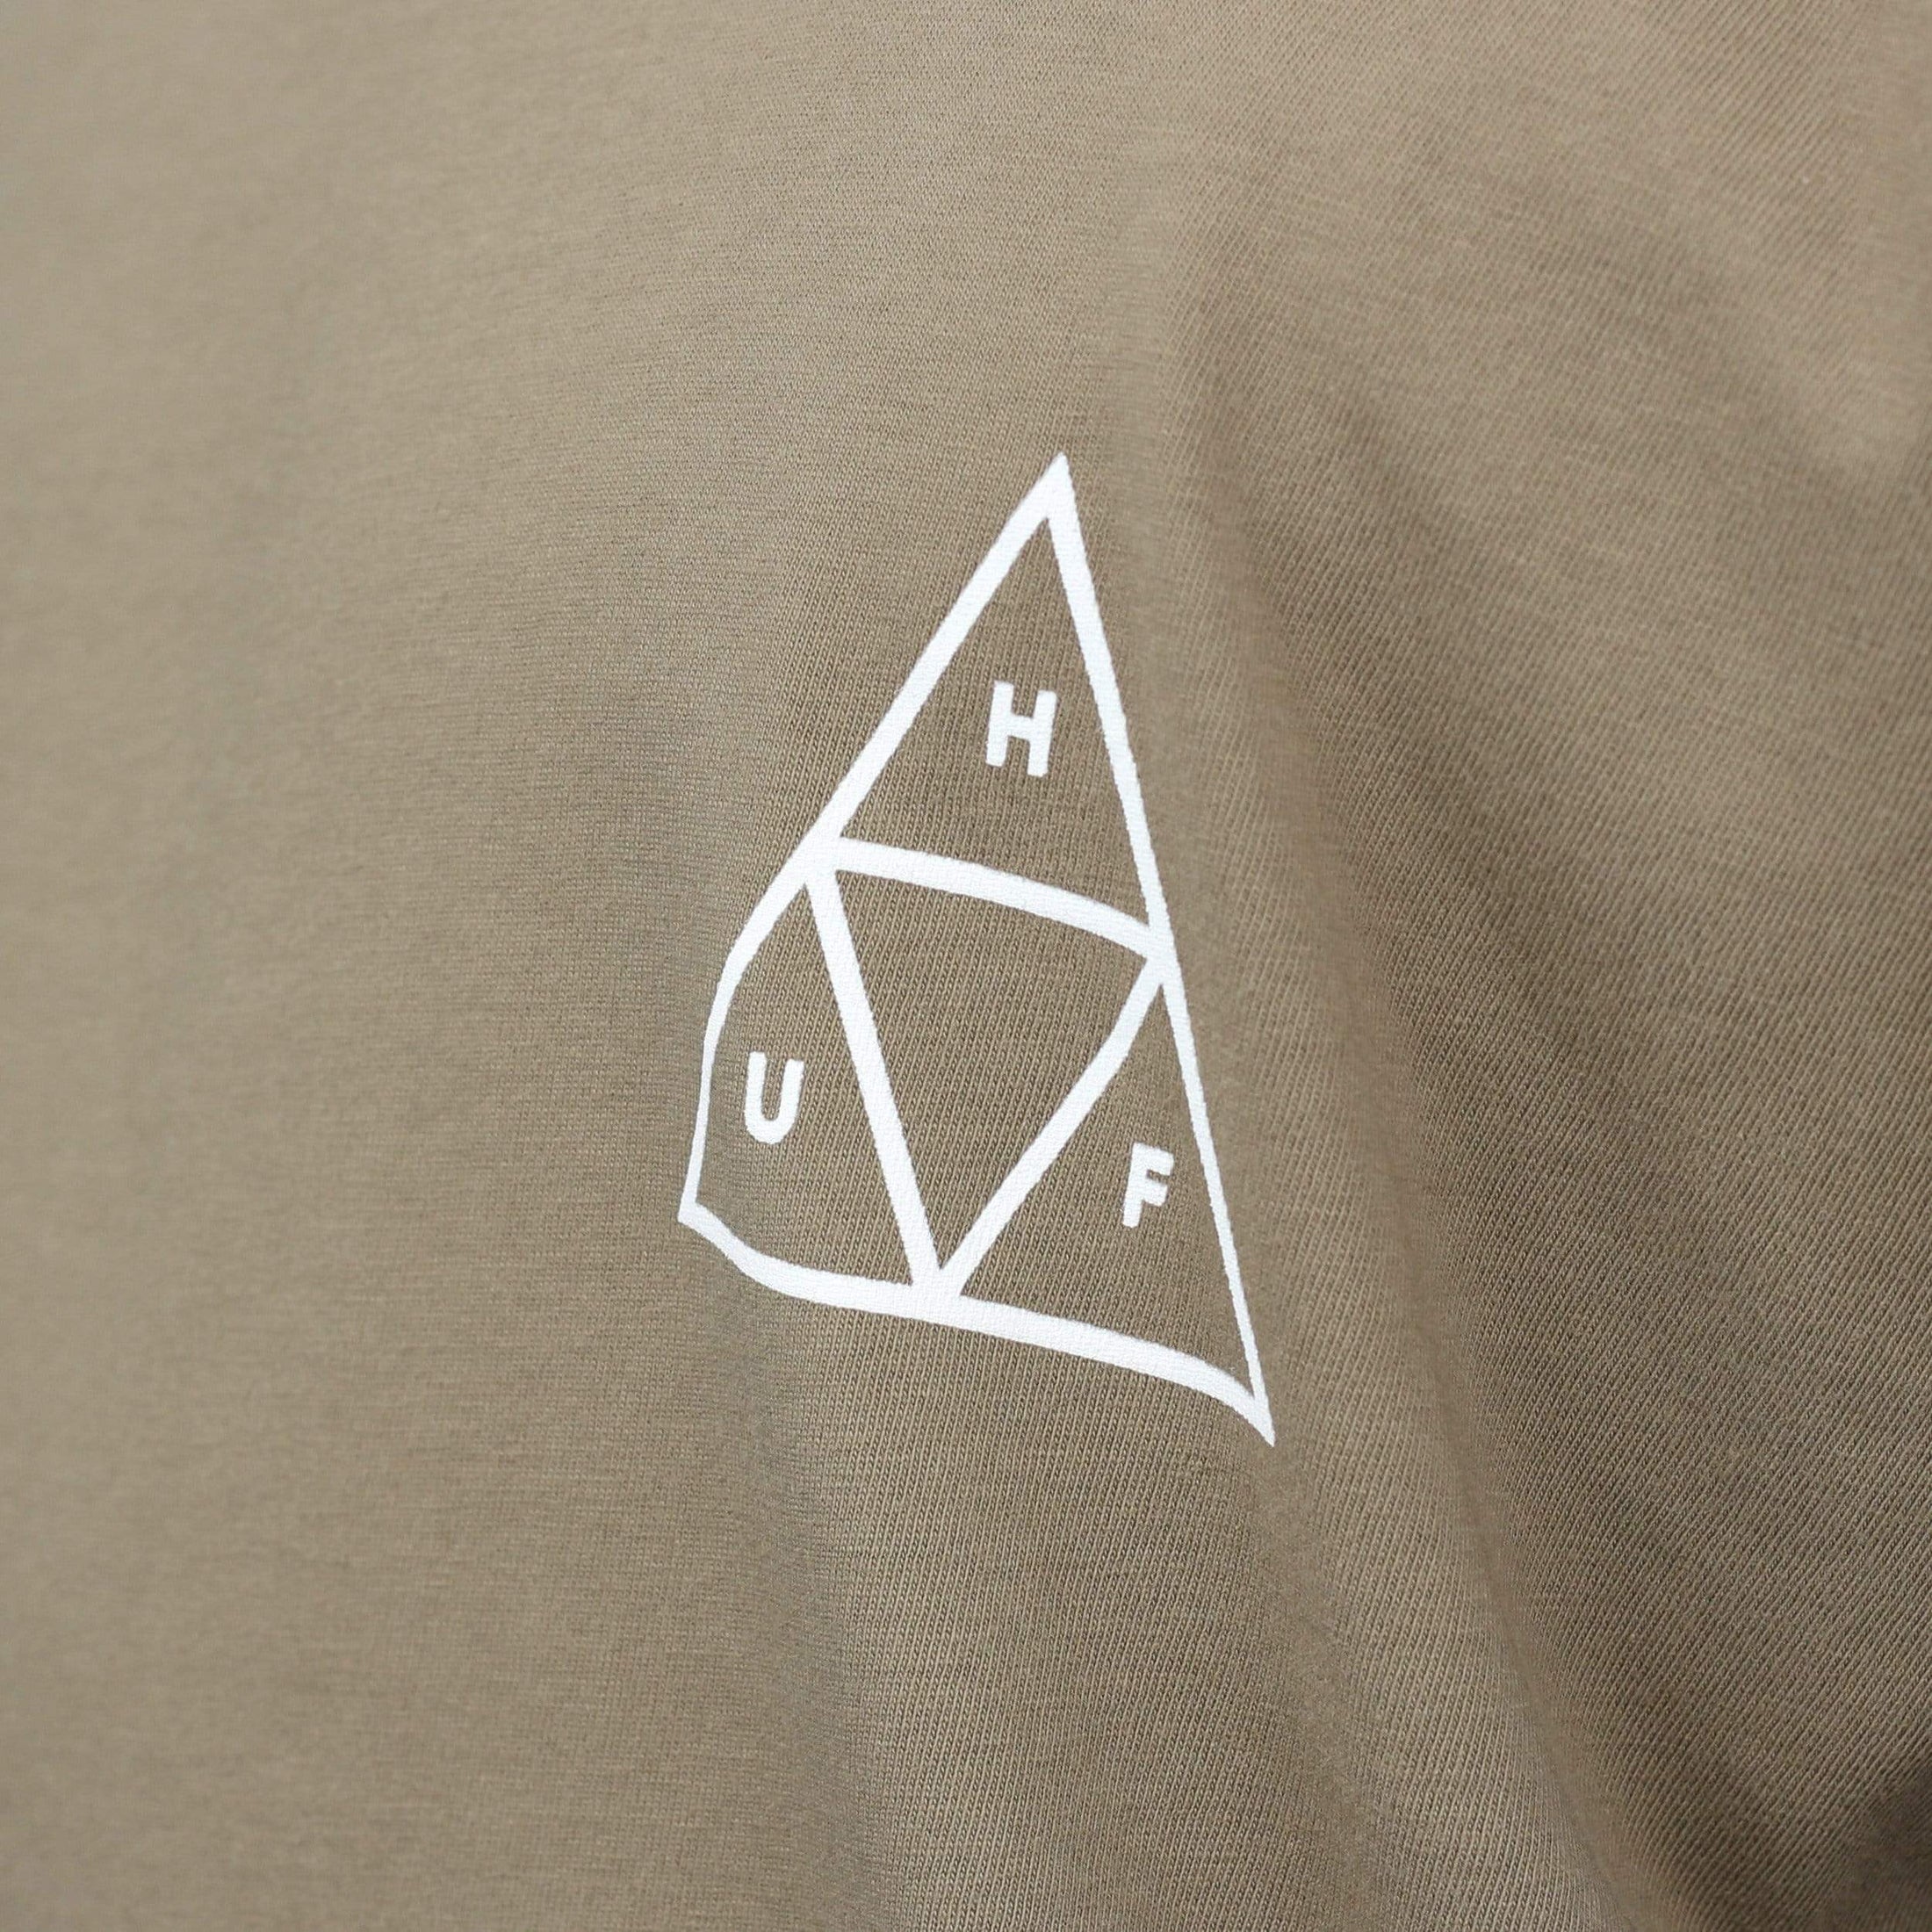 HUF Dystopia Triple Triangle T-Shirt Dried Herb